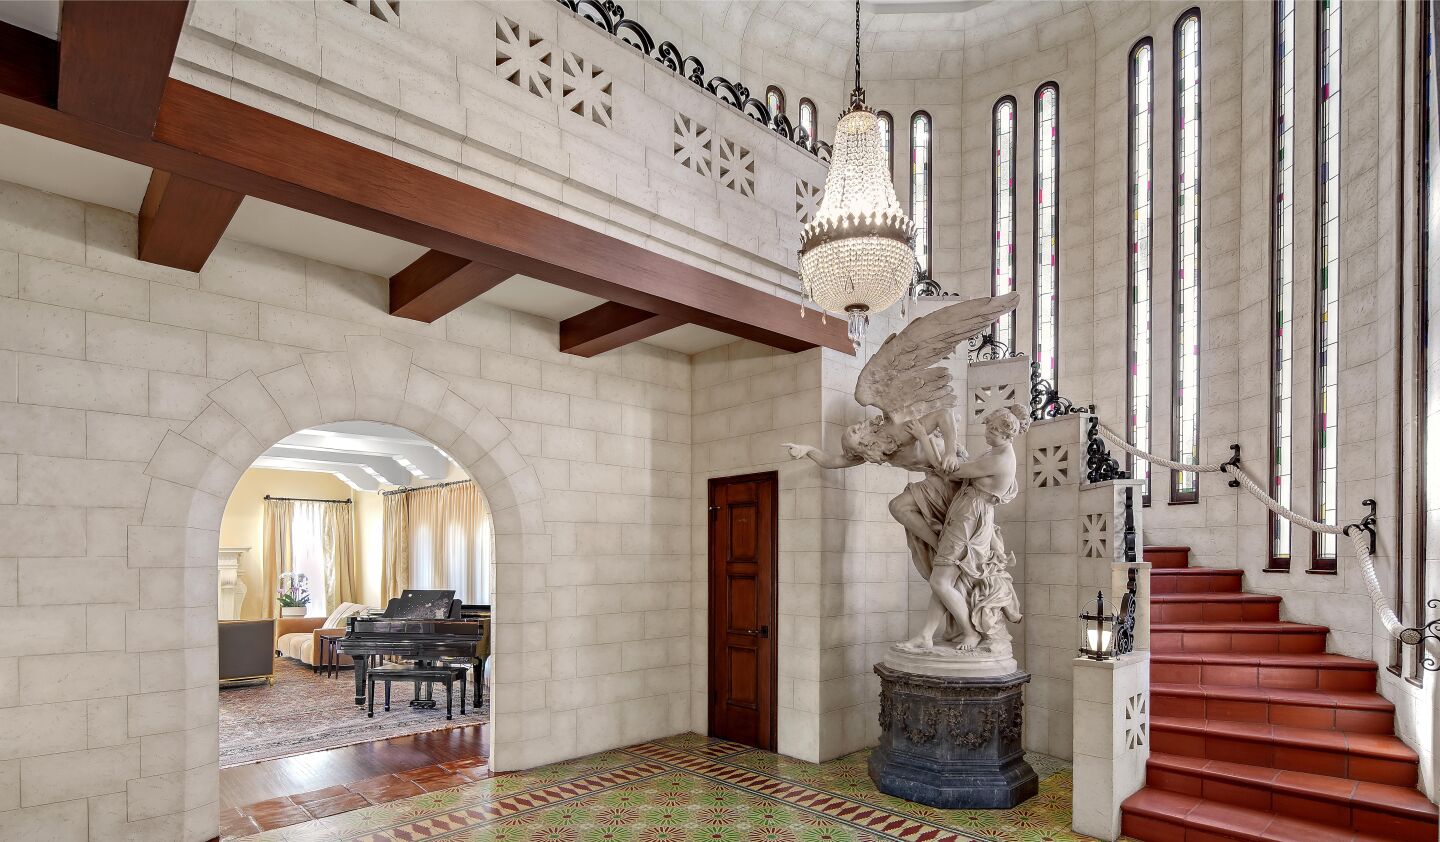 Built in 1928, the Spanish-style showplace holds seven bedrooms, seven bathrooms and a handful of dramatic spaces across more than 7,000 square feet.